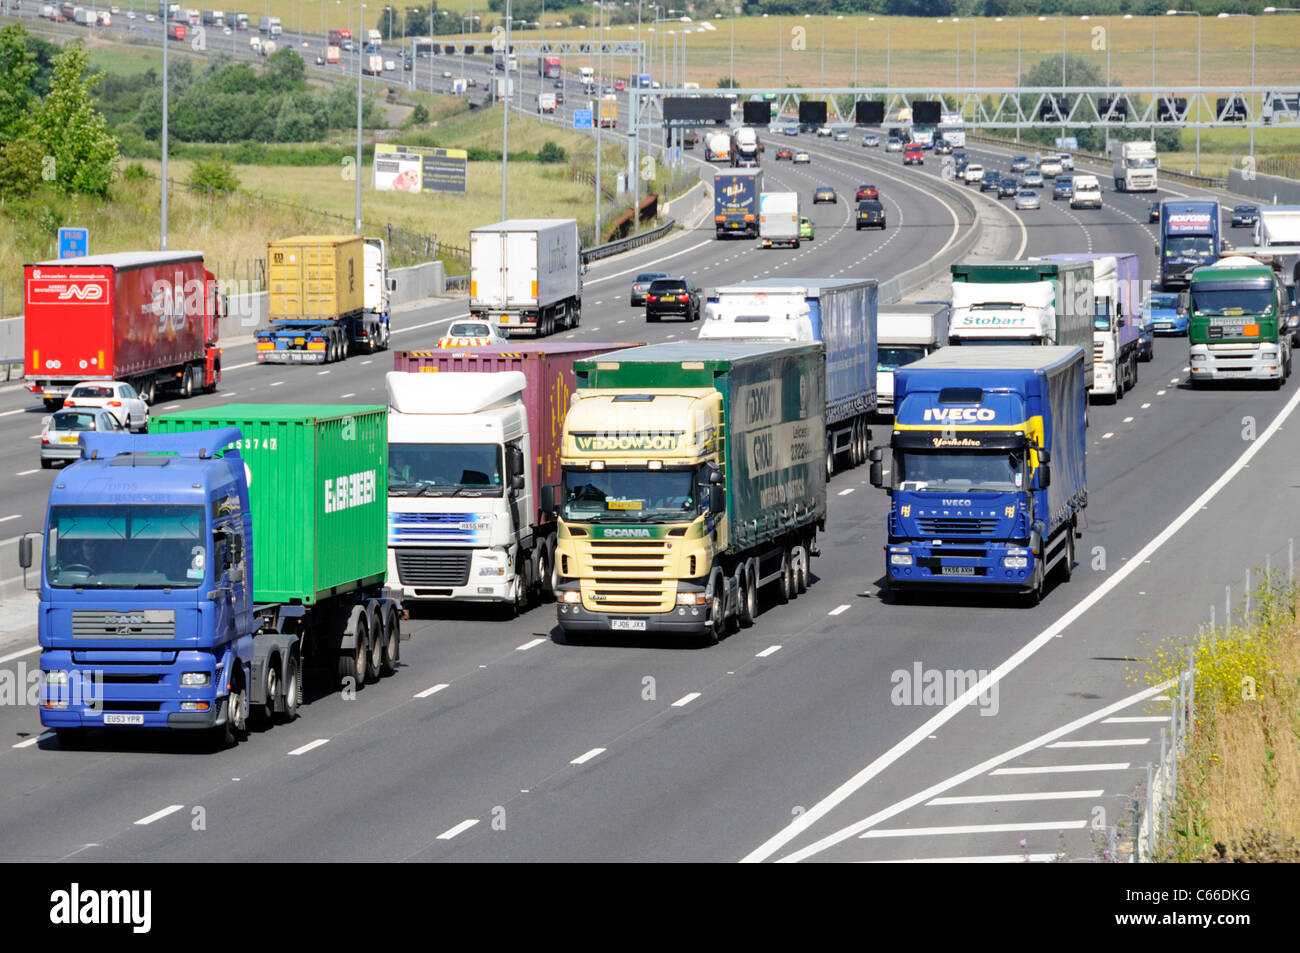 Transport lorry truck four lanes section of M25 motorway Essex countryside overtaking slower hgv lorries & trucks busy traffic on gradient England UK Stock Photo